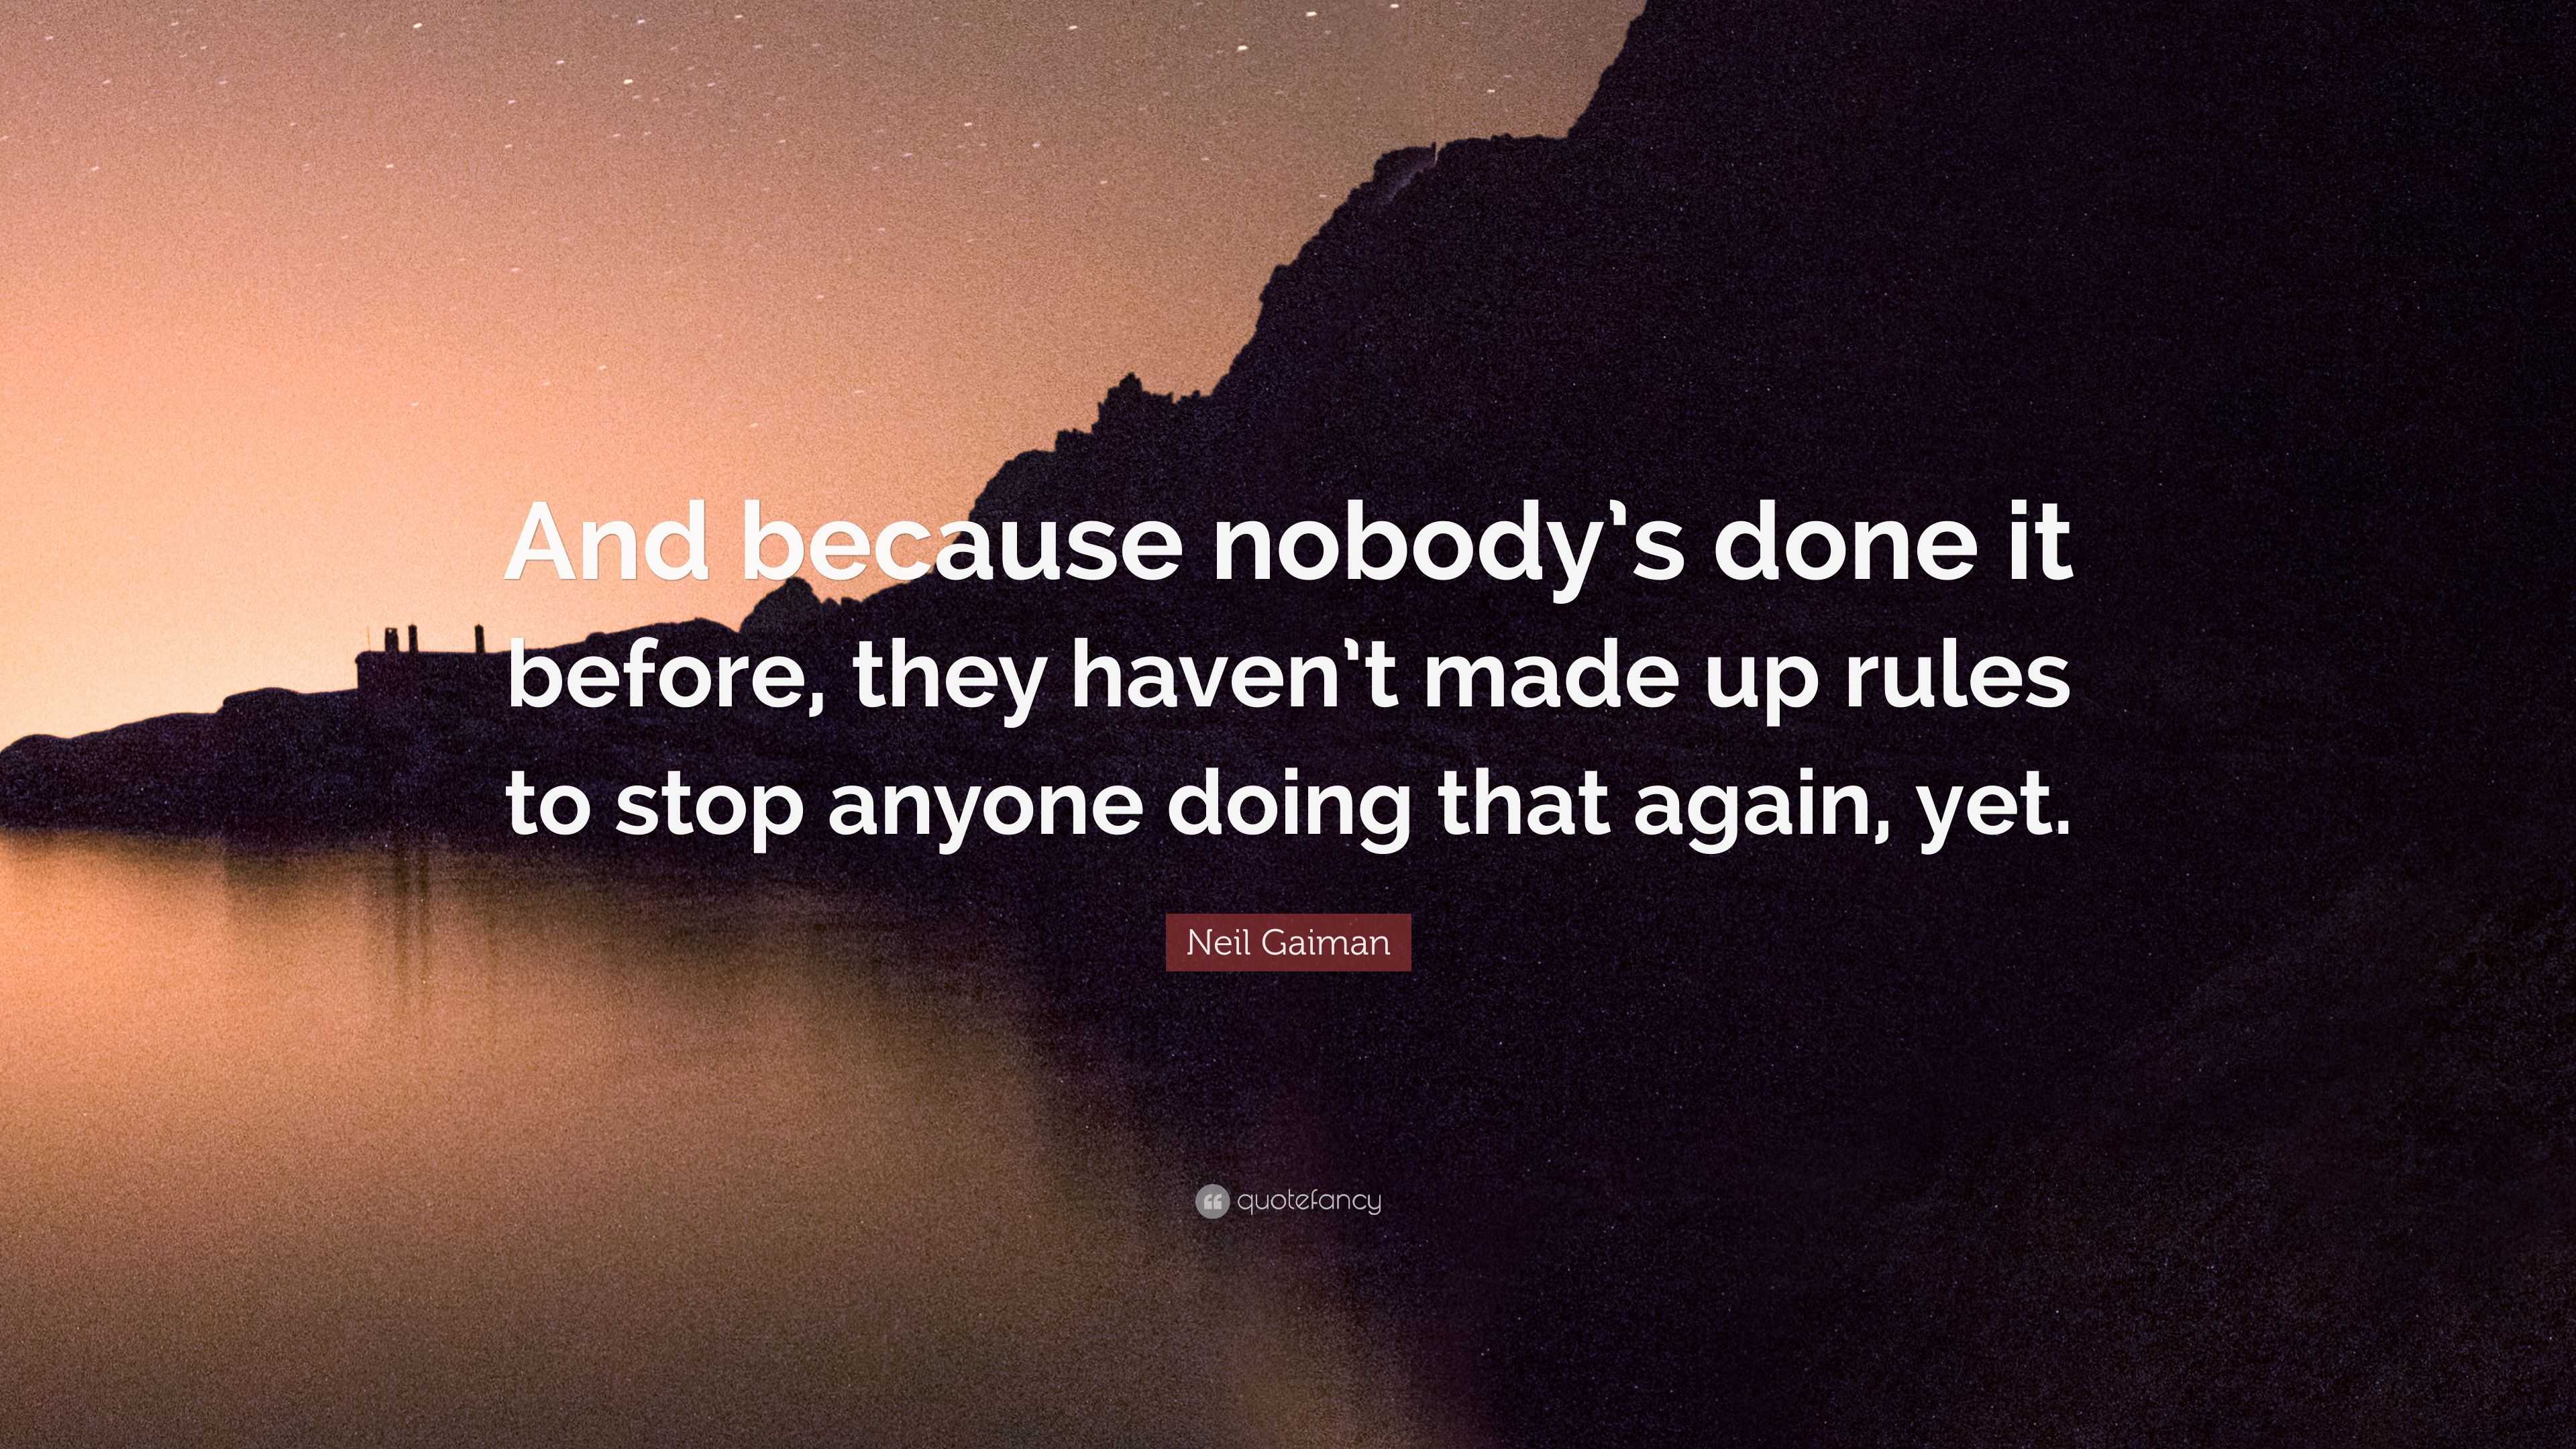 Neil Gaiman Quote: “And because nobody’s done it before, they haven’t ...